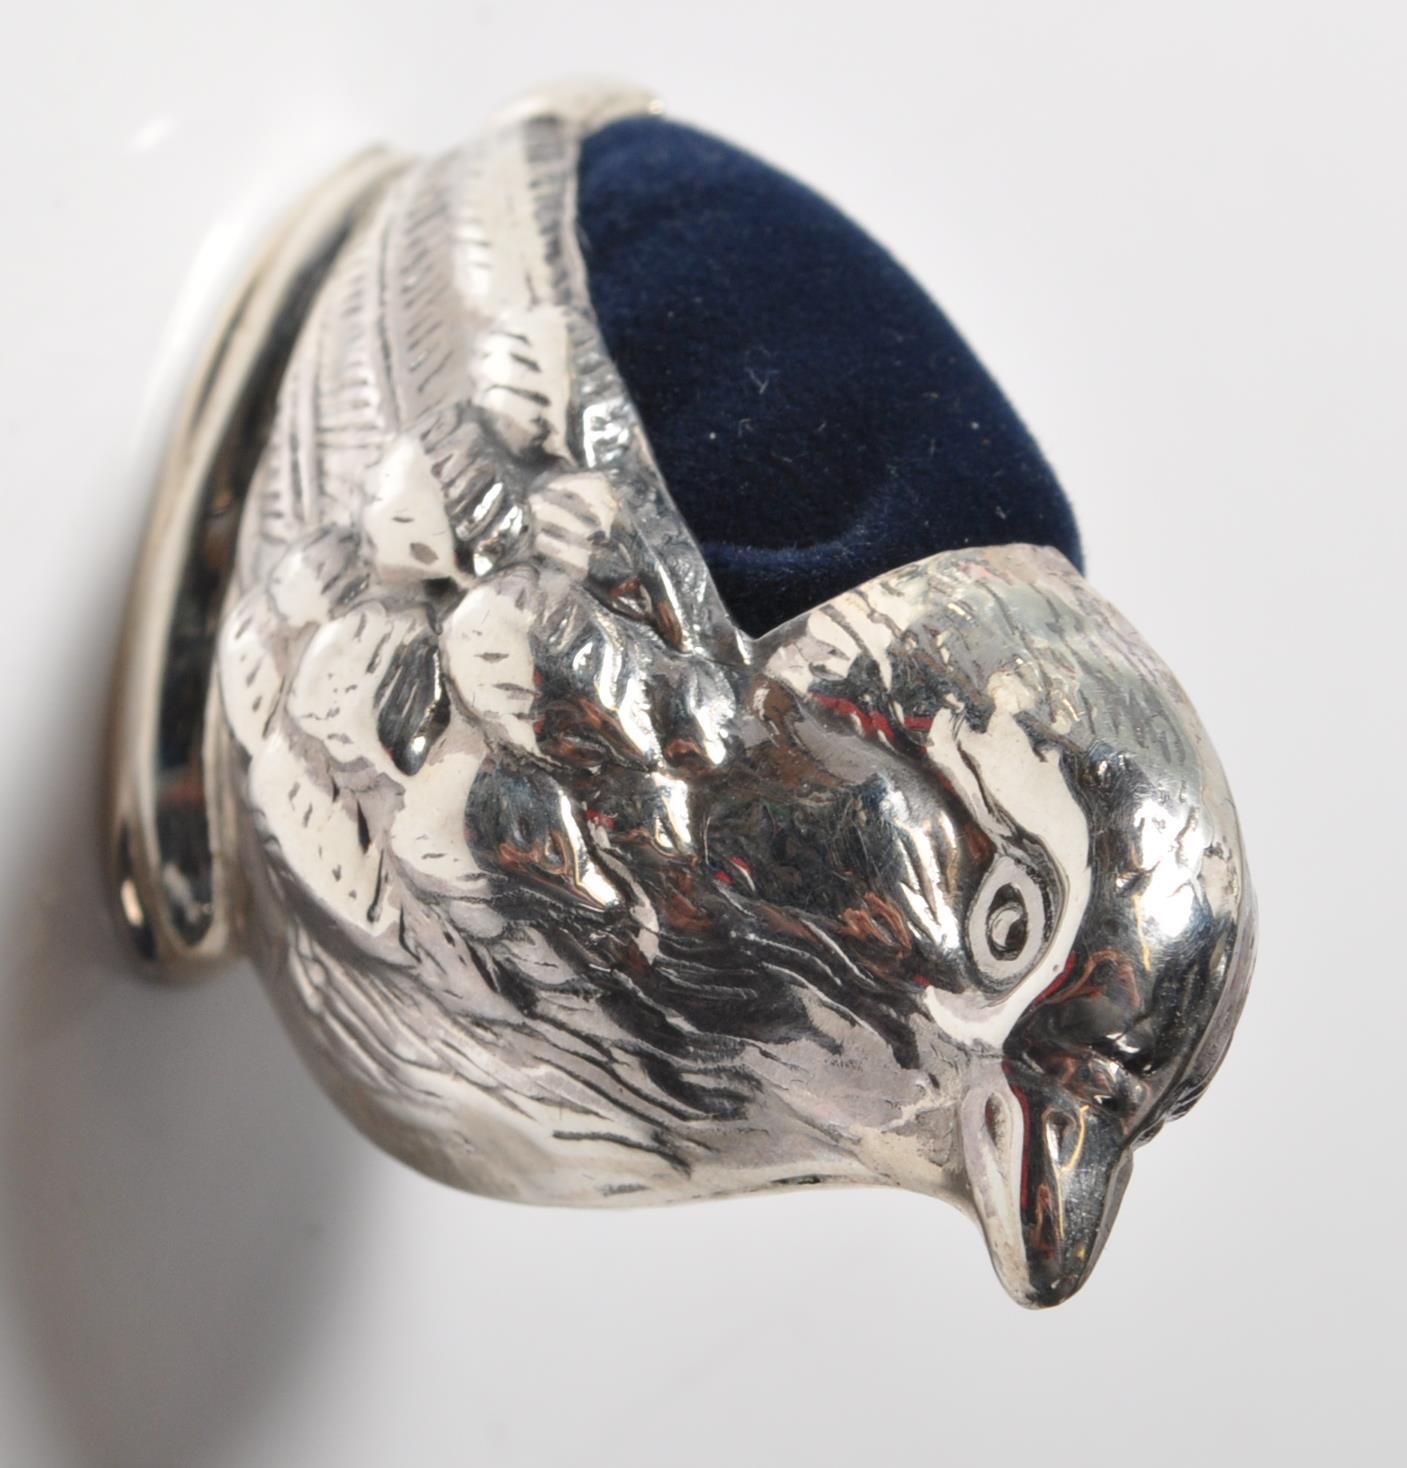 A STAMPED STERLING SILVER PINCUSHION IN THE FORM OF A ROBIN - Image 2 of 5